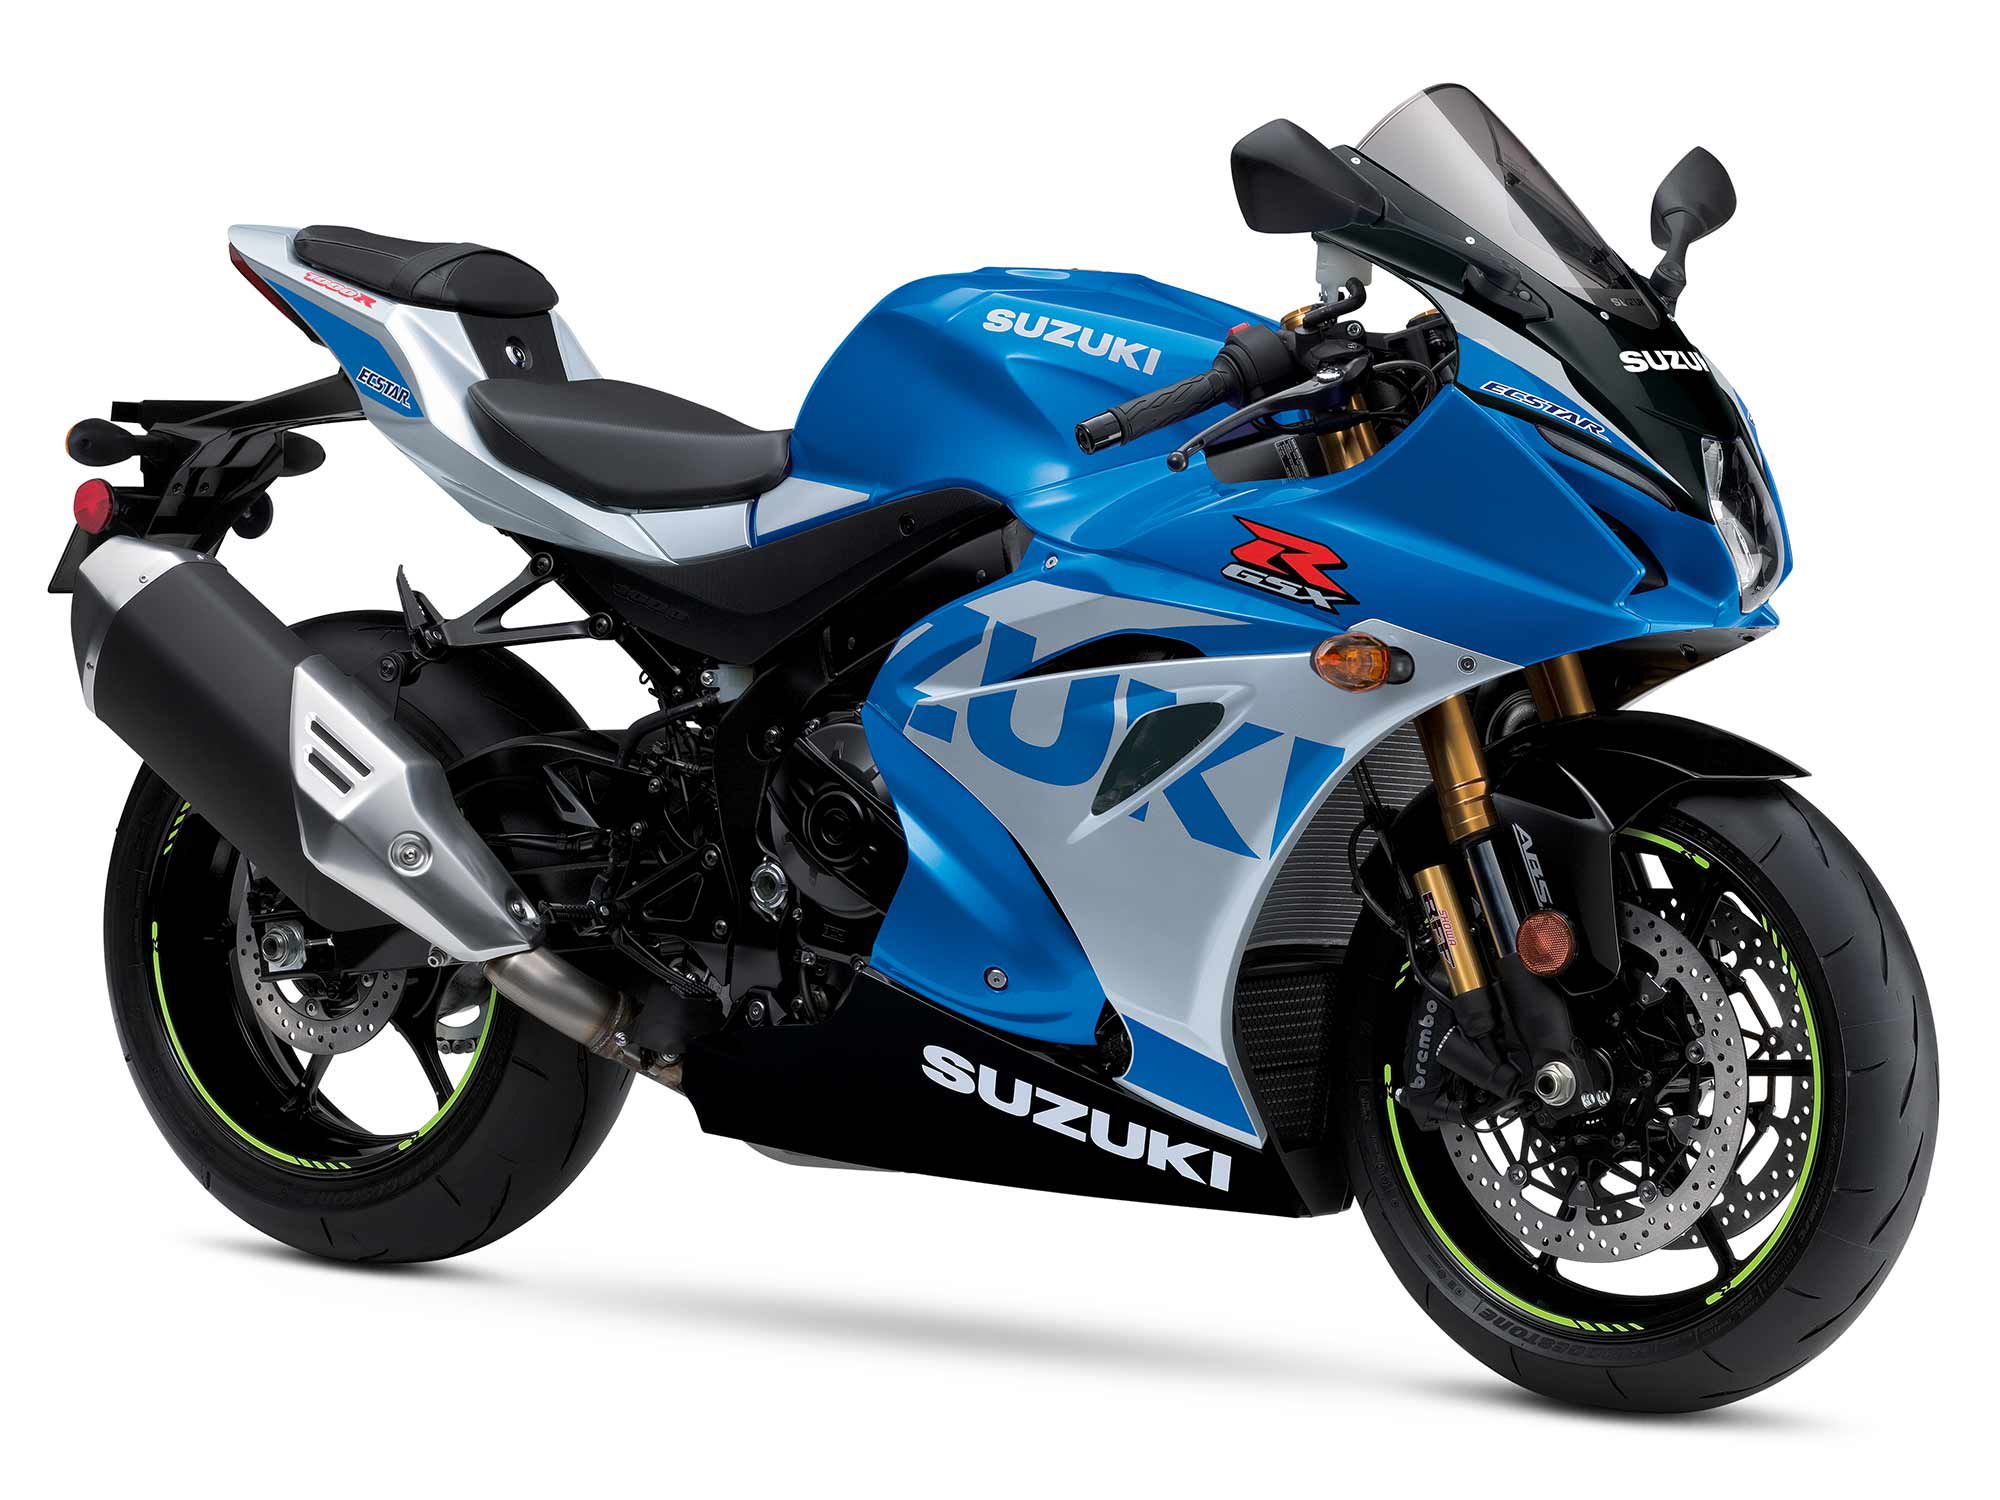 The 2023 Suzuki GSX-R1000R doesn’t get any mechanical updates, but will come in three new colorways.